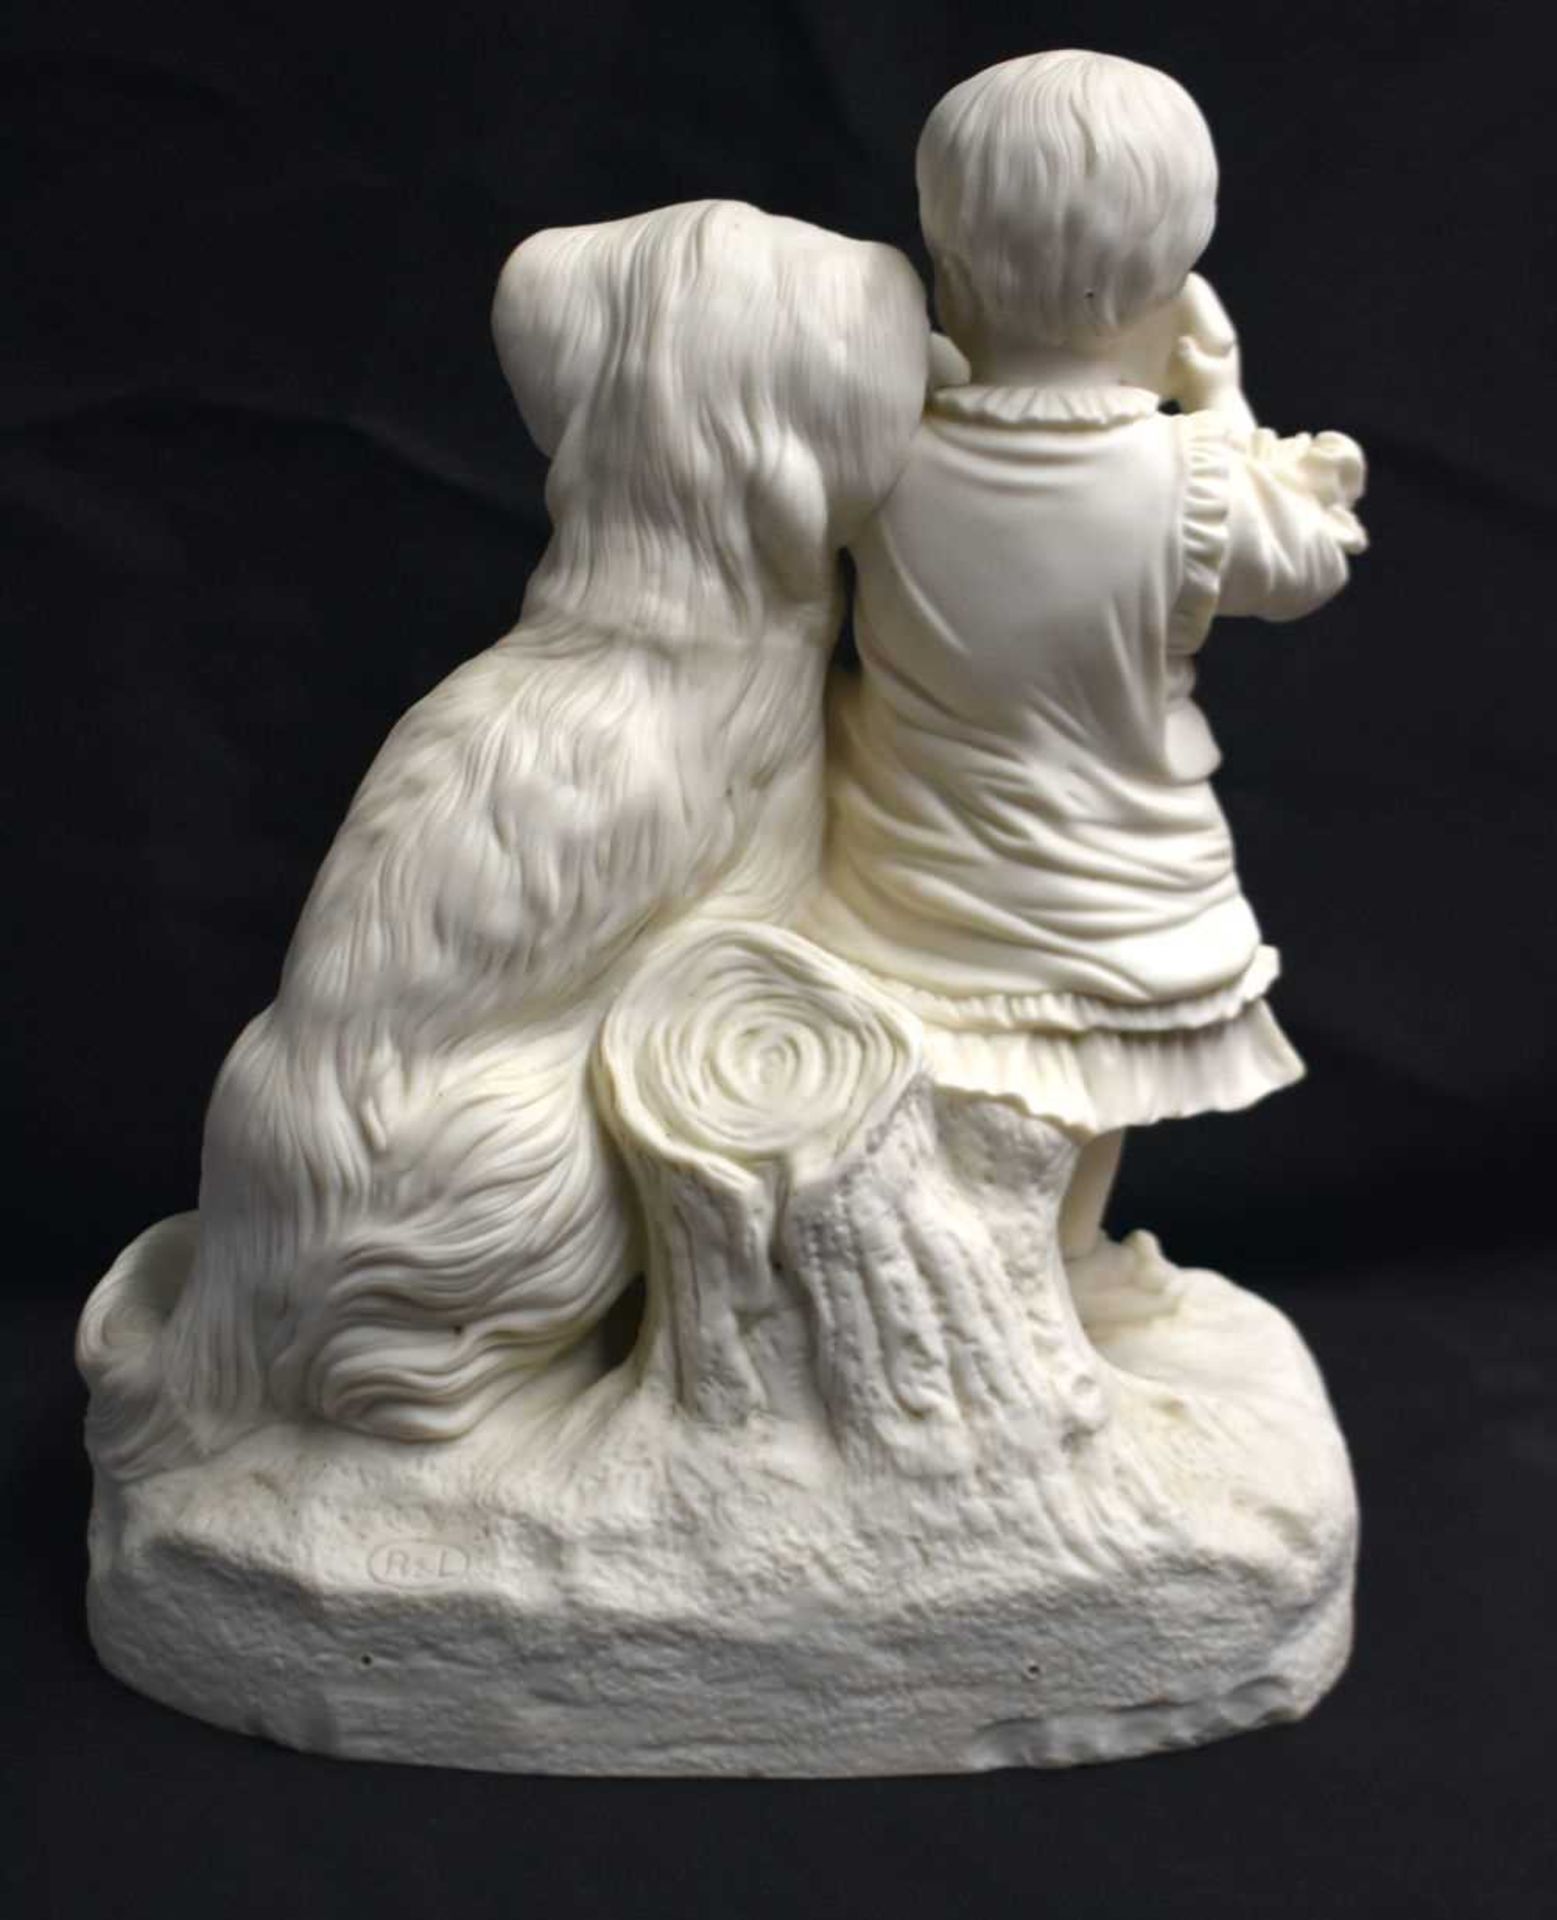 A RARE 19TH CENTURY ROBINSON AND LEADBEATER PARIAN WARE FIGURE Don't Be Greedy. 30 cm x 20 cm. - Image 3 of 4